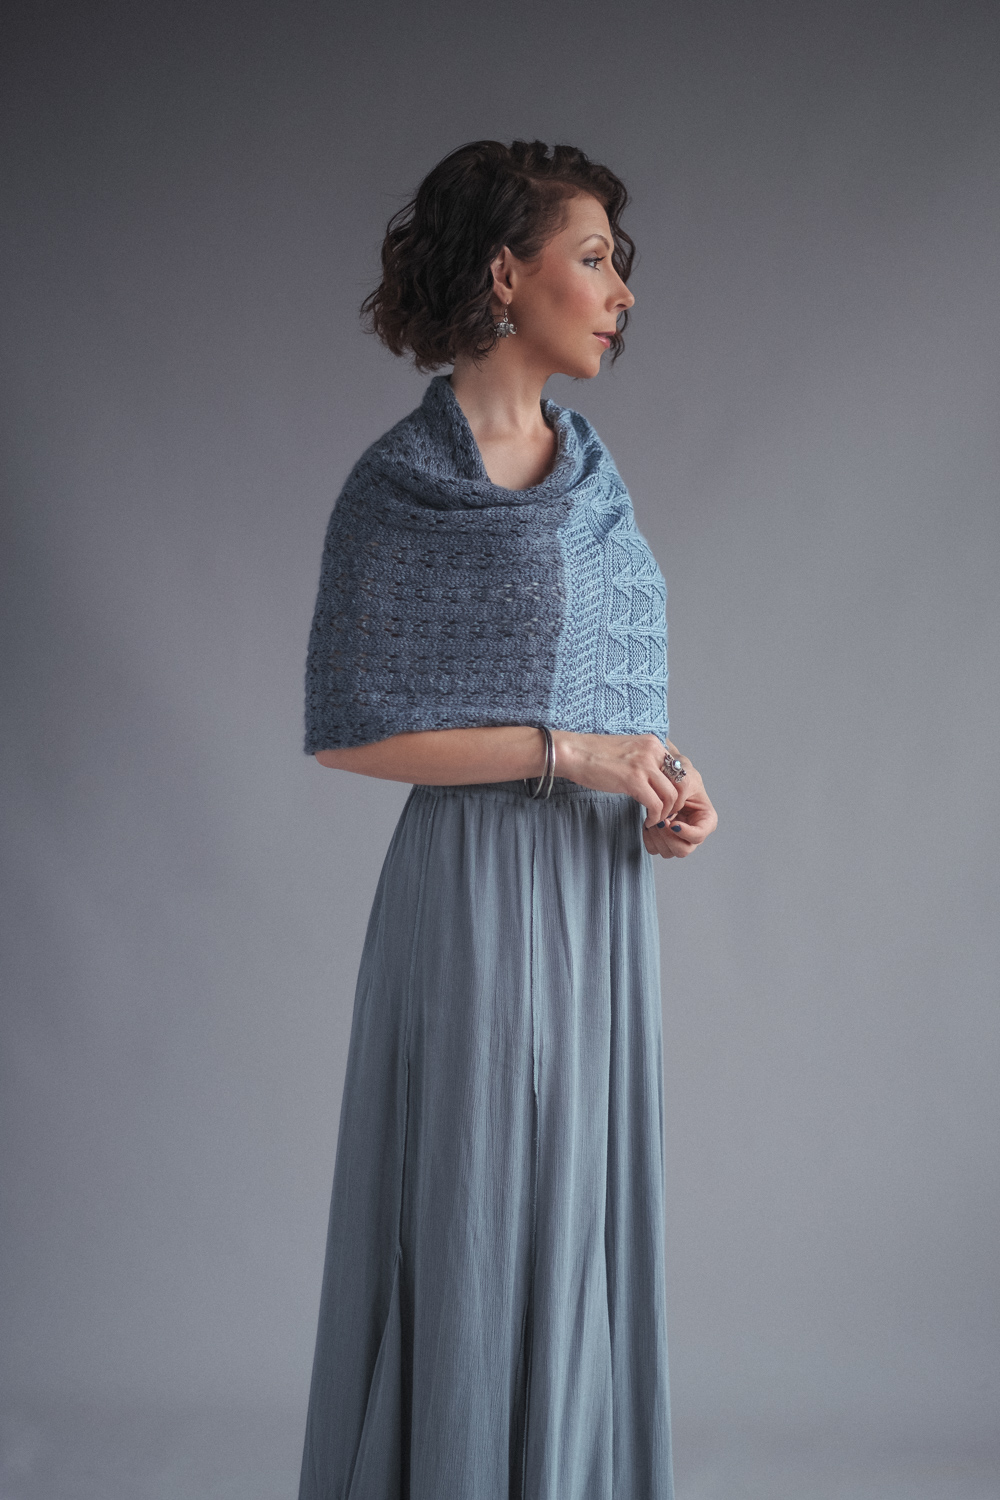 tamsyn skill levels beginner to advanced knitted shawl pattern